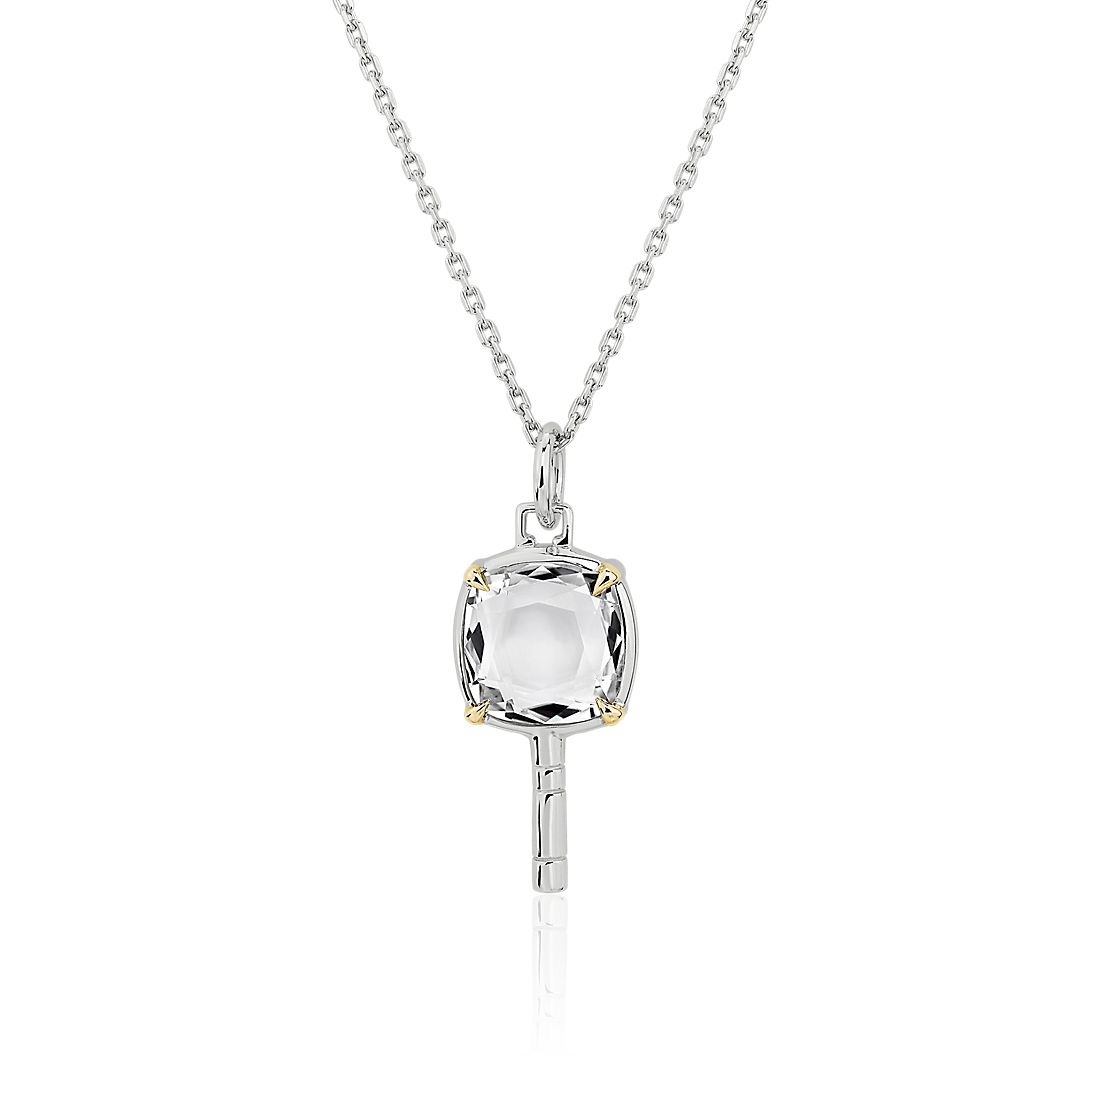 Monica Rich Kosann Mini Pocketwatch Key Necklace in Sterling Silver and 18k Yellow Gold